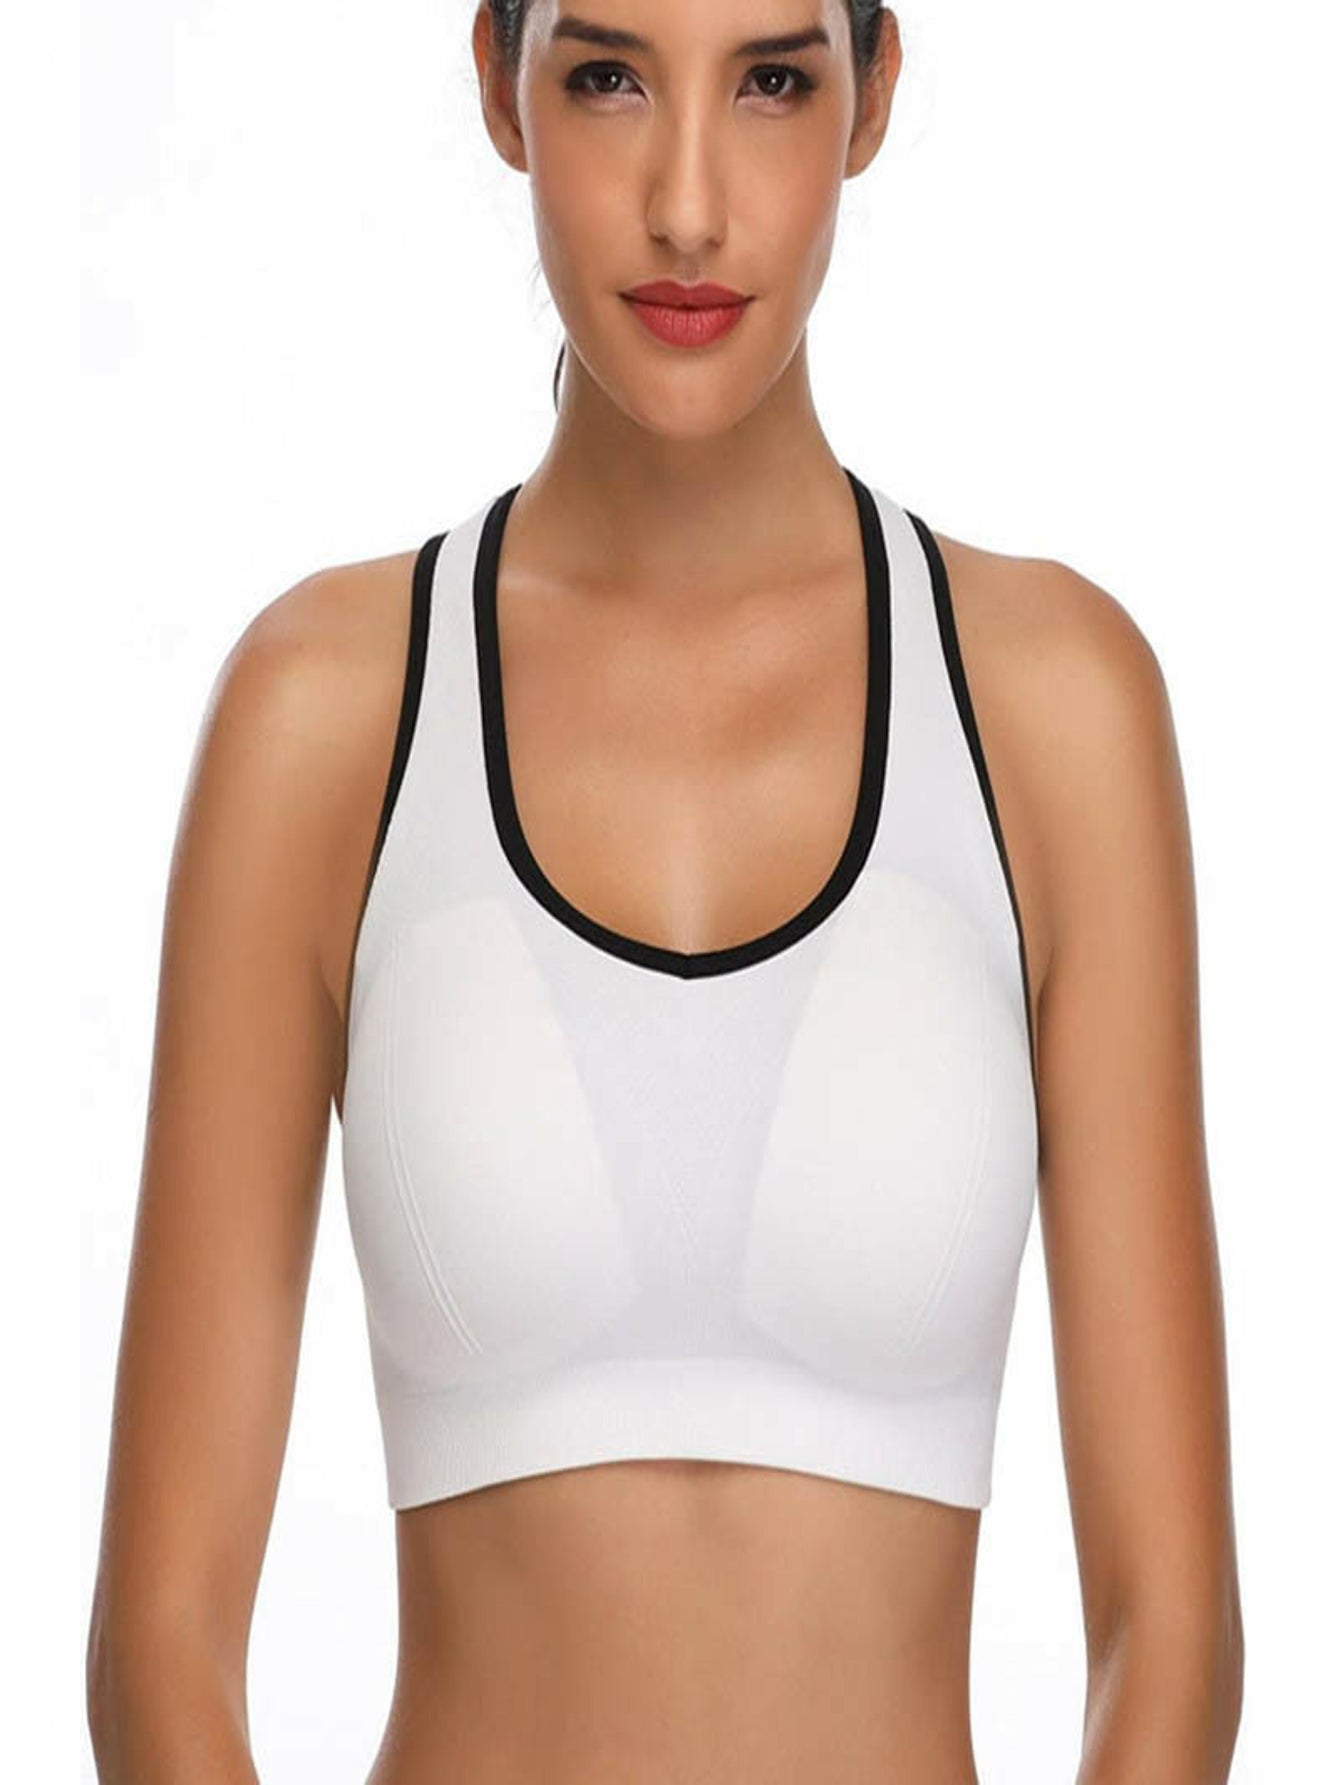 Womnen's Sexy Sport Bra Three Back Shoulder Straps with Cup Crop Tops Sai Feel